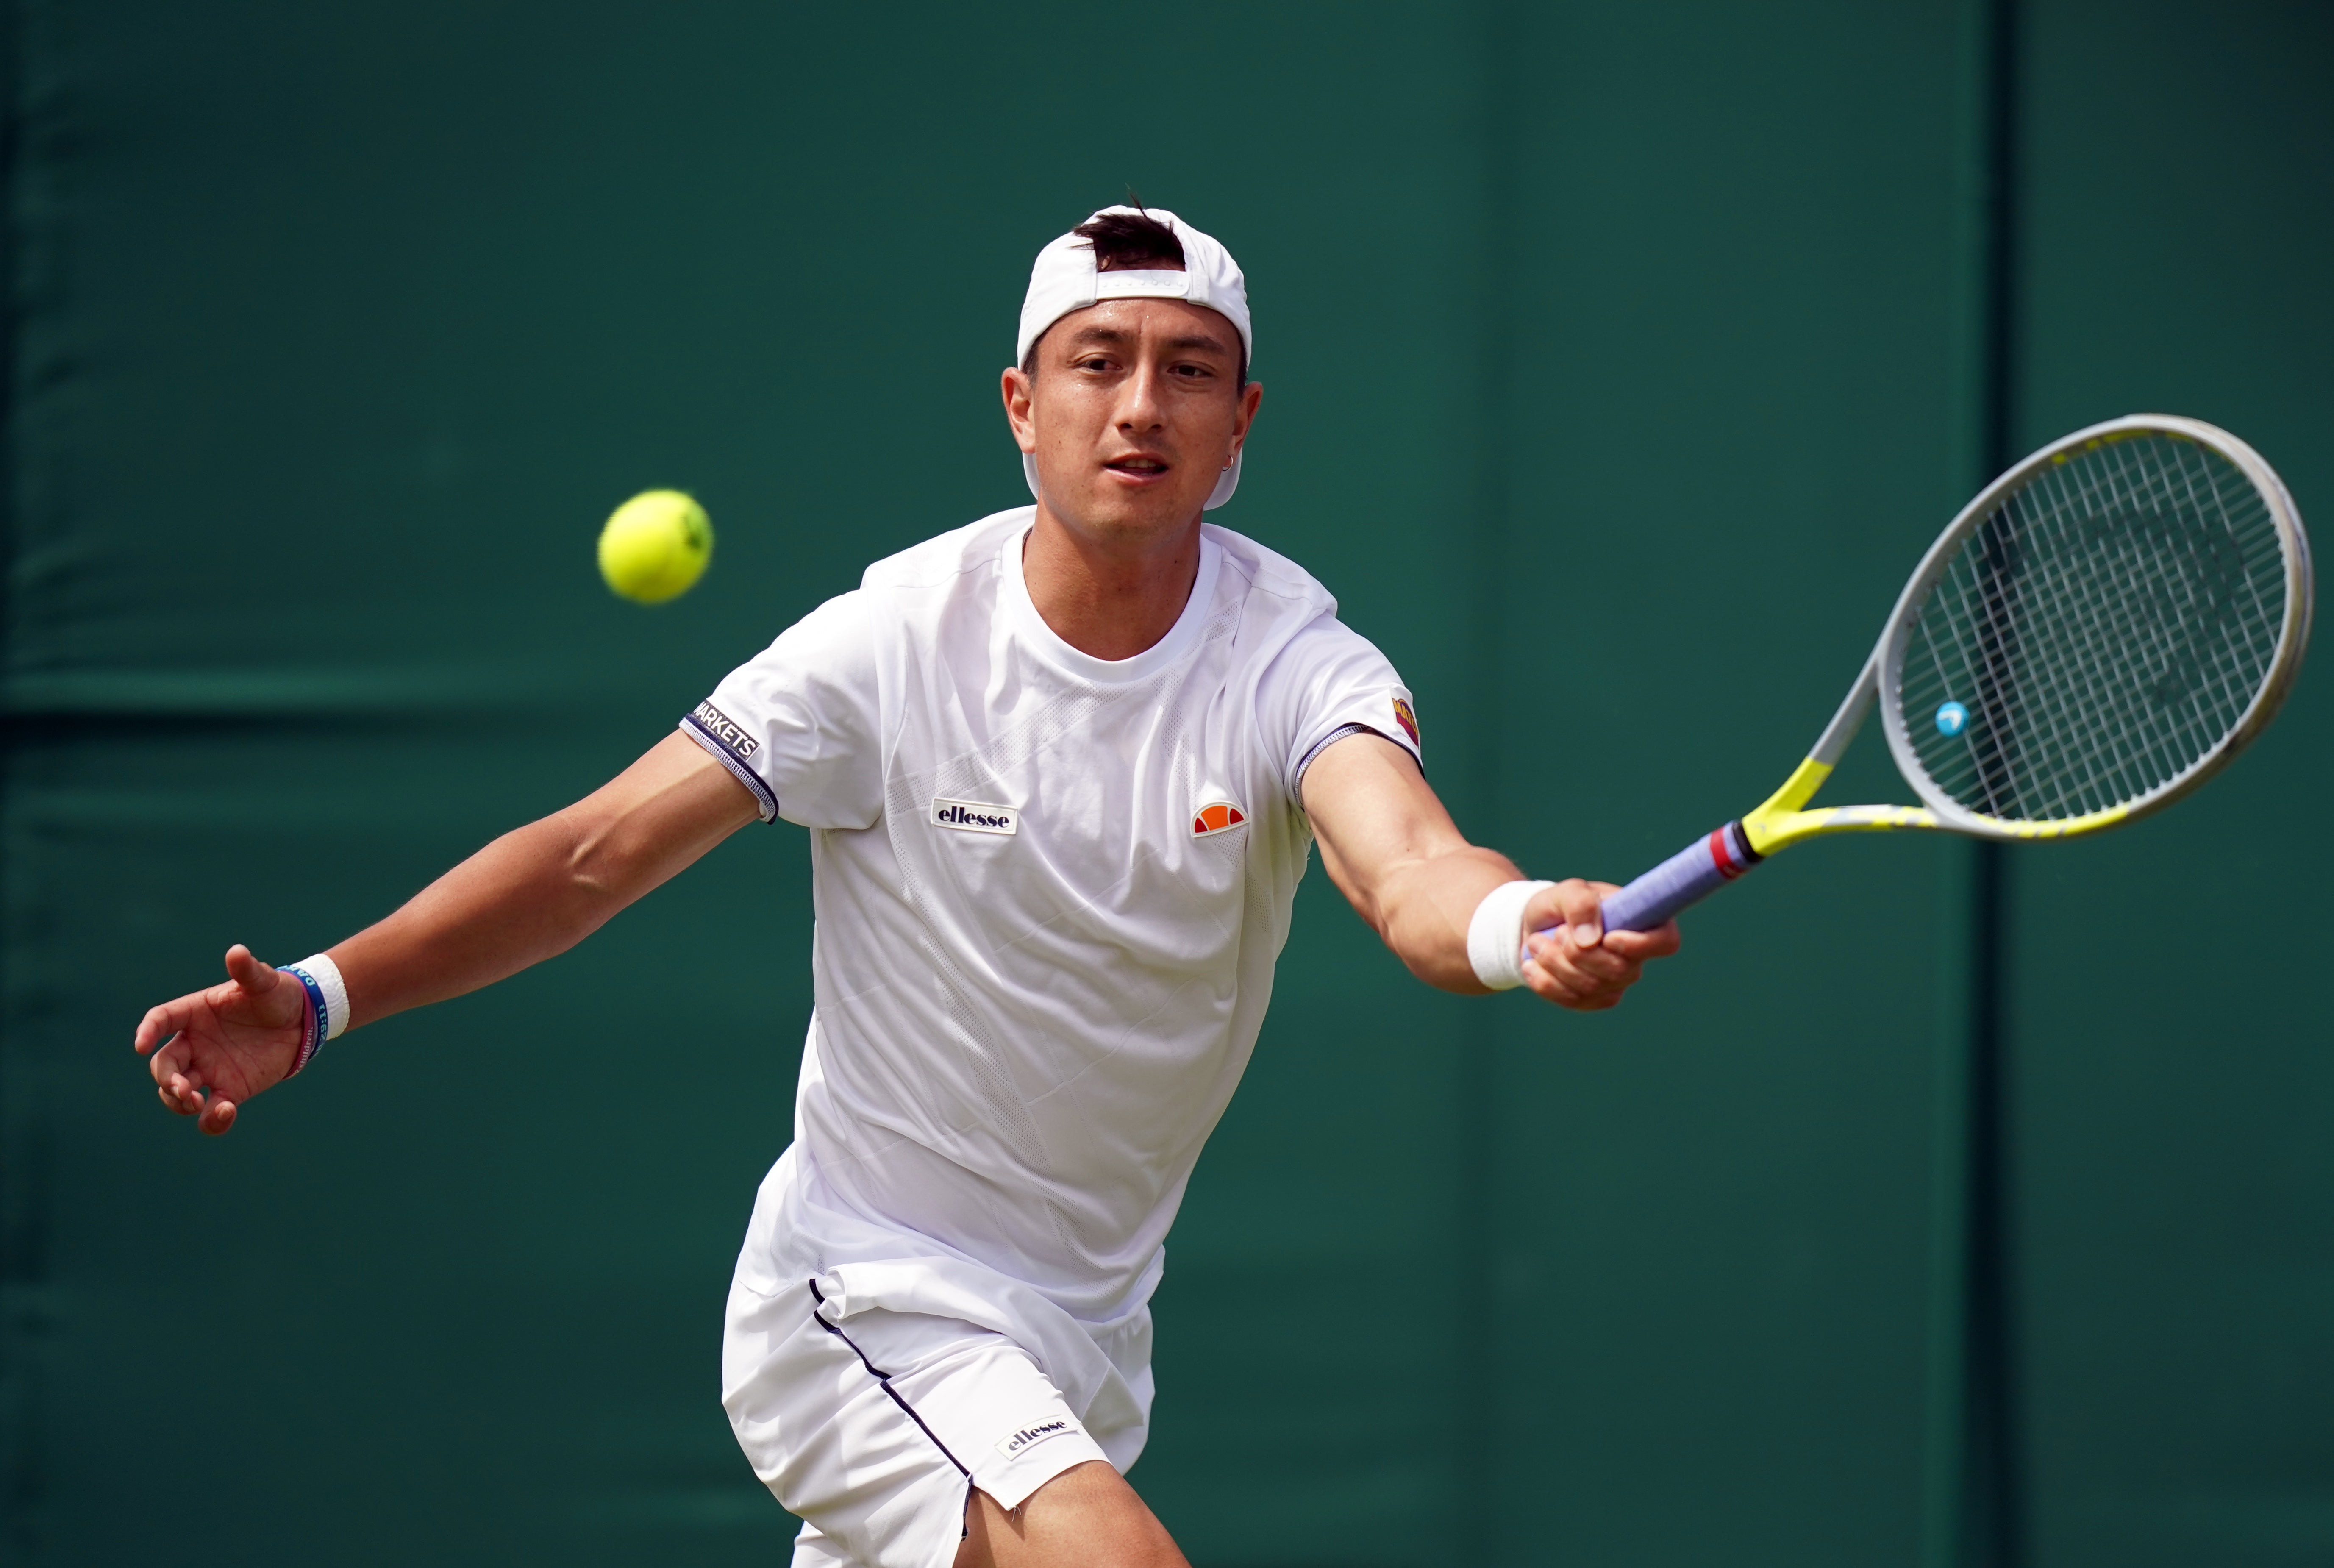 Ryan Peniston in action against Steve Johnson on day three of the 2022 Wimbledon Championships at the All England Lawn Tennis and Croquet Club, Wimbledon. Picture date: Wednesday June 29, 2022.